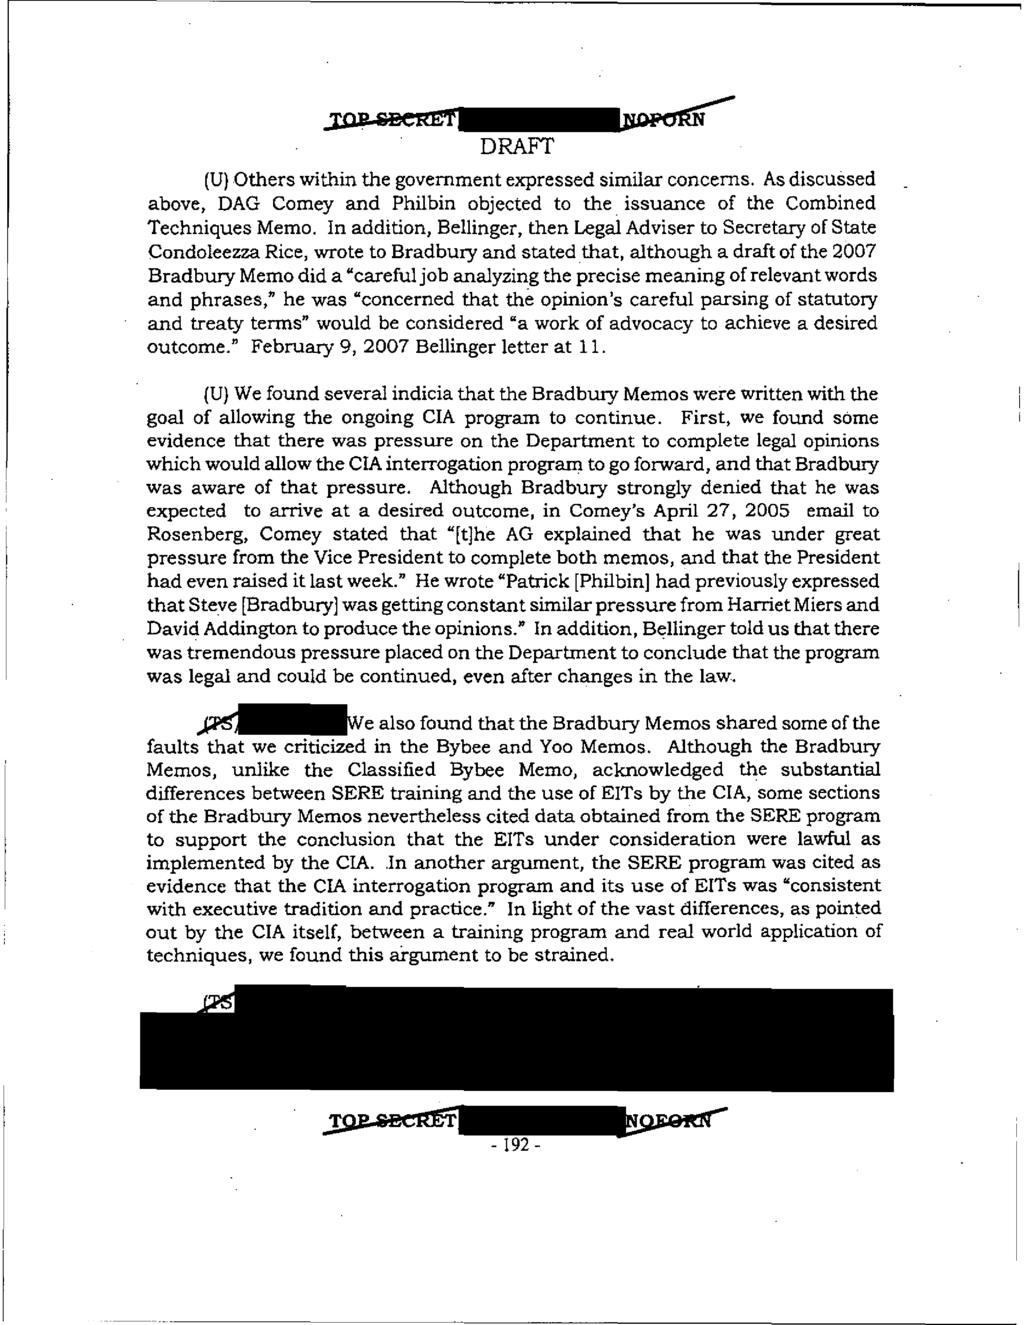 DRAFT (U) Others within the government expressed similar concerns. As discussed above, DAG Carney and Philbin objected to the issuance of the Combined Techniques Memo.